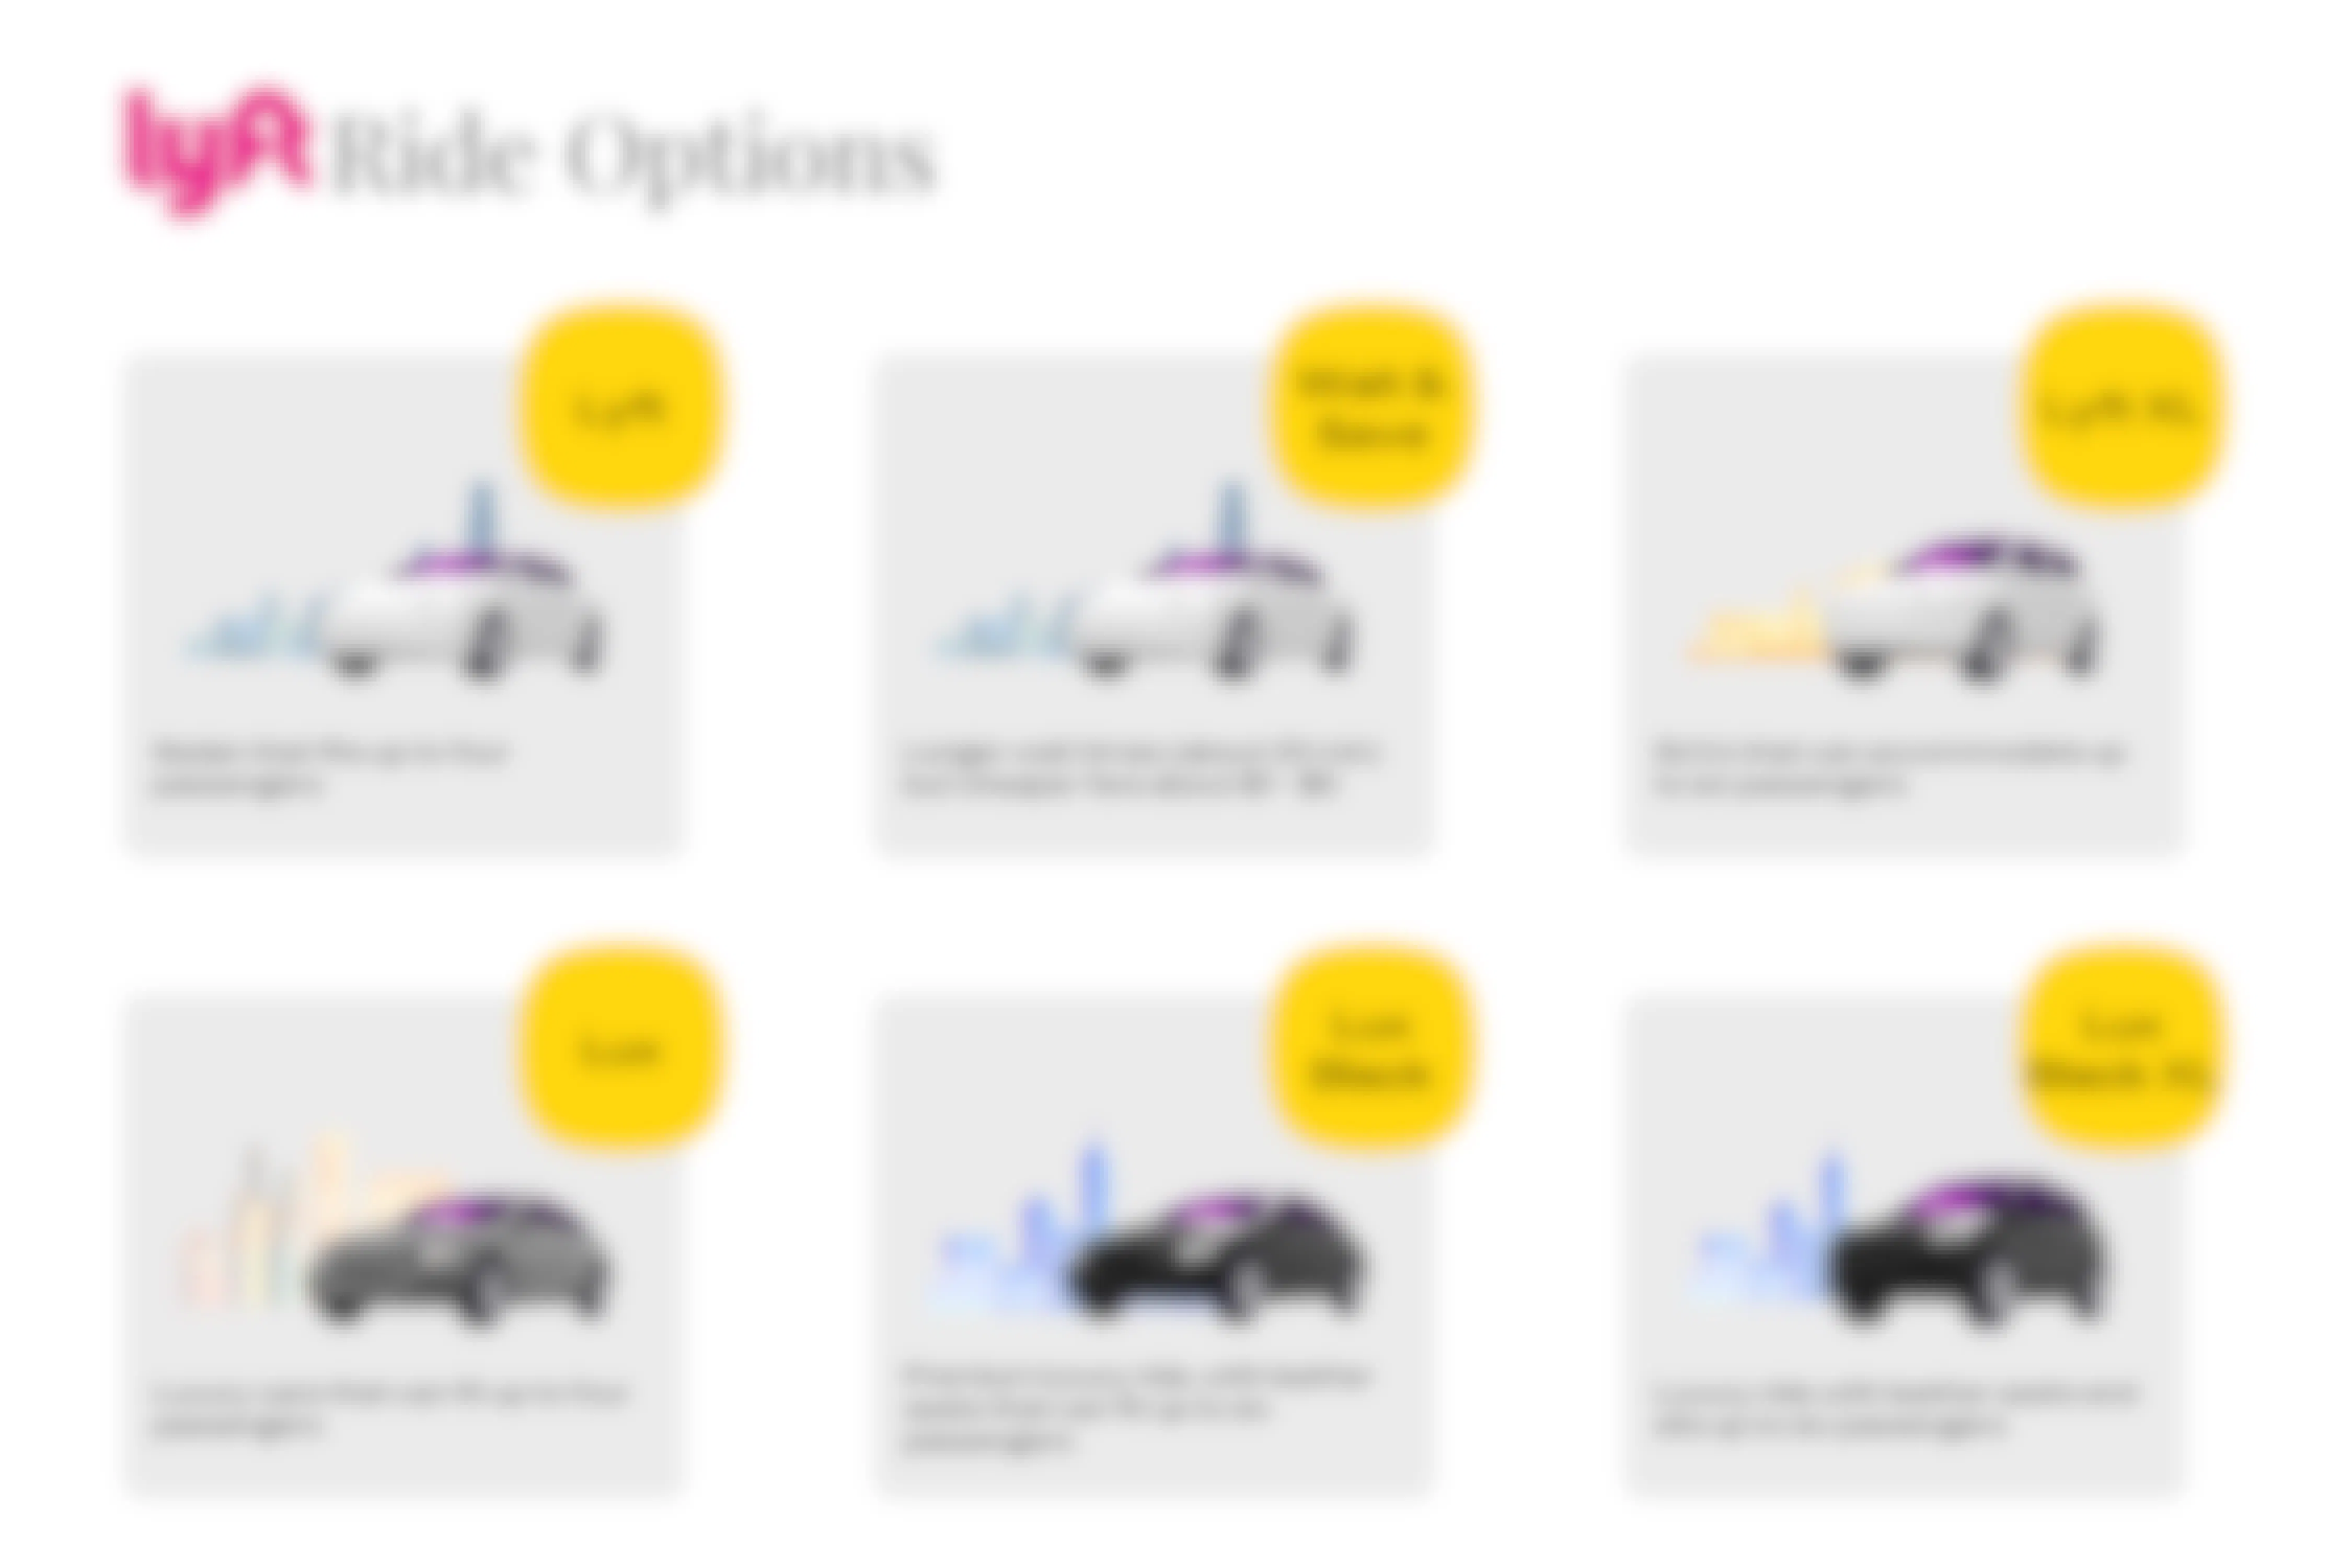 all of the lyft ride options available. Lyft: Sedan that fits up to four passengers Wait & Save: Longer wait times (about 20 min) but cheaper fare about $1 - $5 Lyft XL: SUVs that can accommodate up to six passengers Lux: Luxury care that can fit up to four passengers Lux Black: Premium luxury ride, with leather seats that can fit up to six passengers Lux Black XL: Luxury ride with leather seats and sits up to six passengers